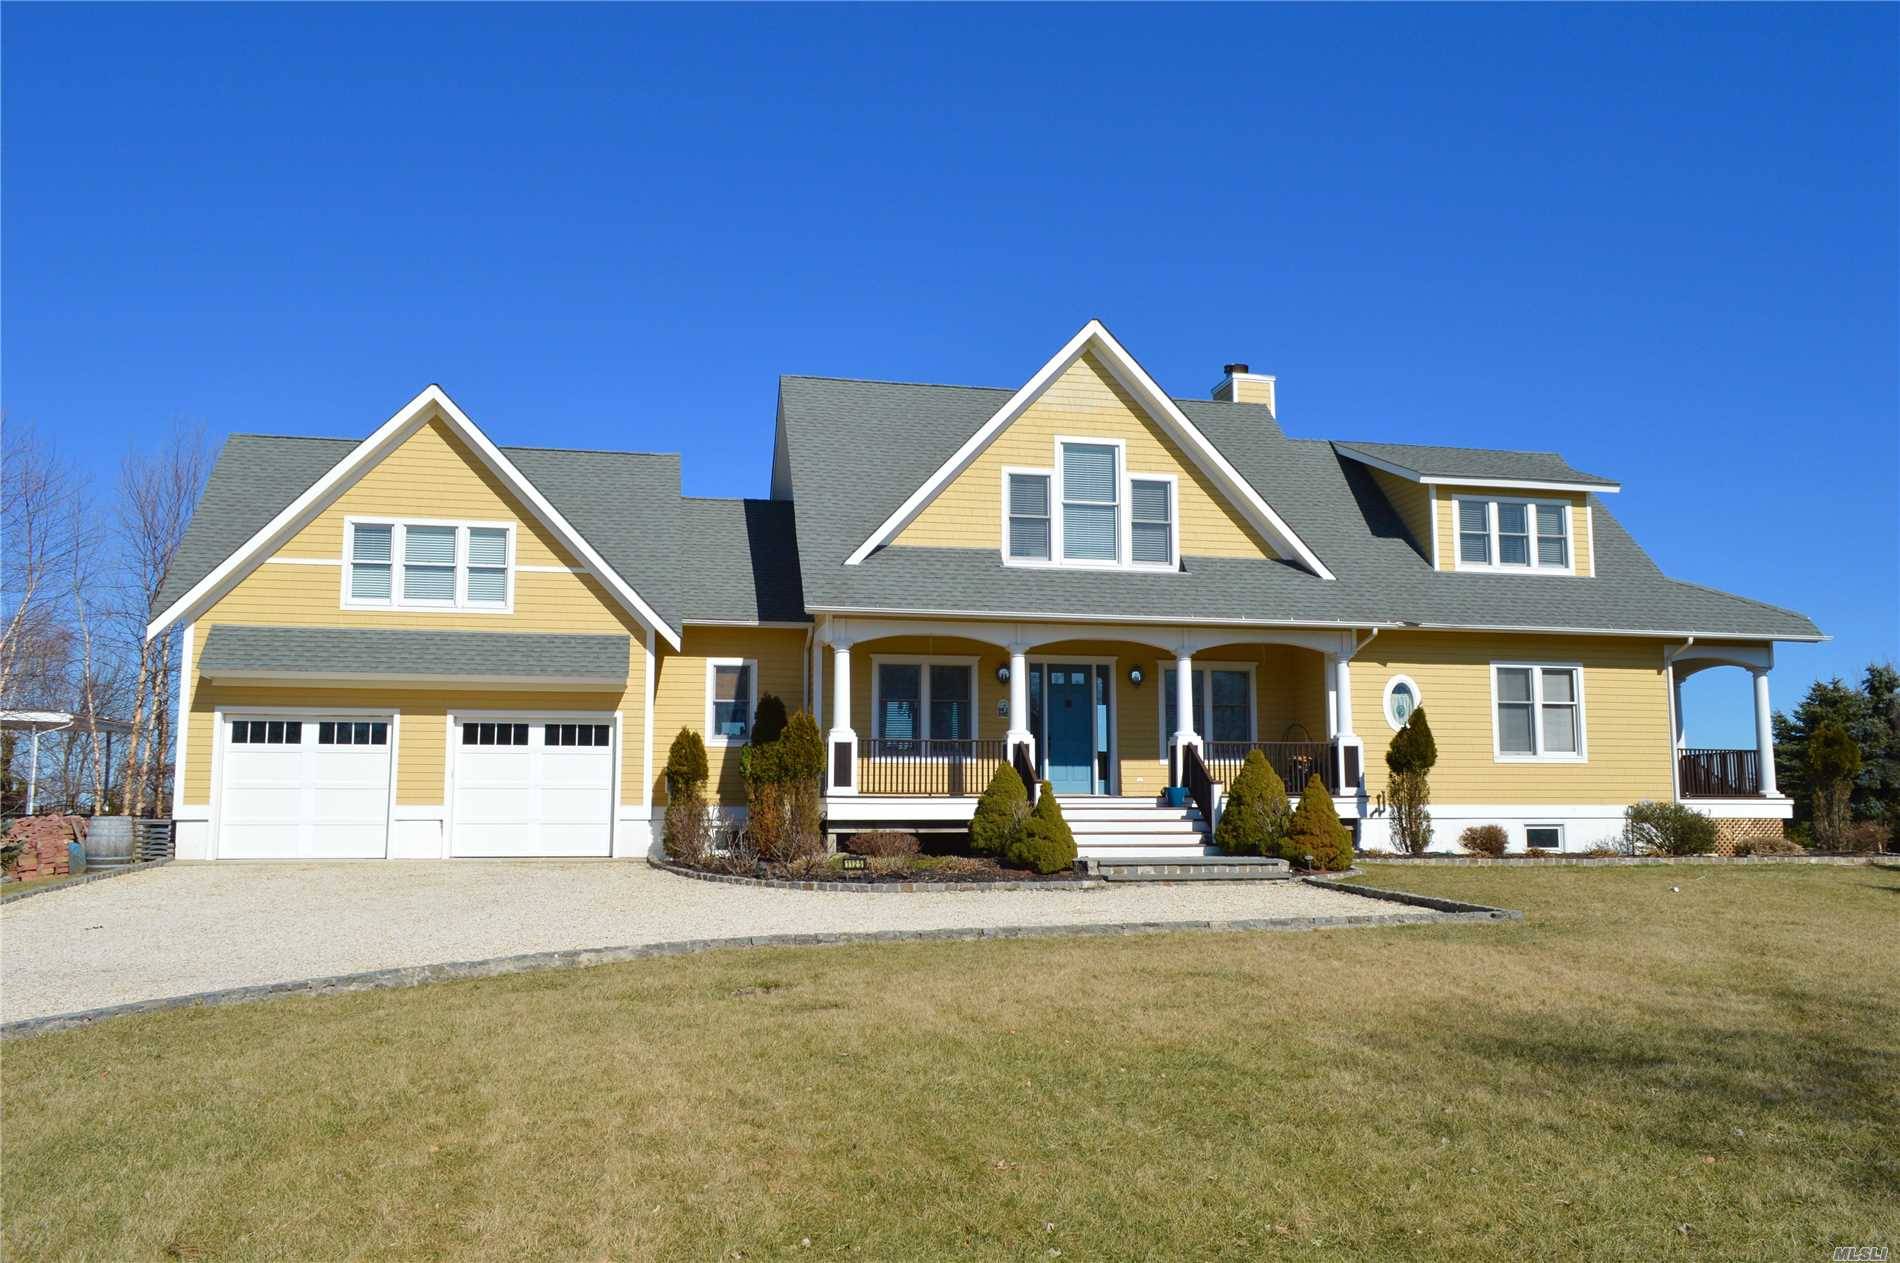 Gorgeous Custom Built Home With Wide Open Views Across Preserved Land To Long Island Sound.